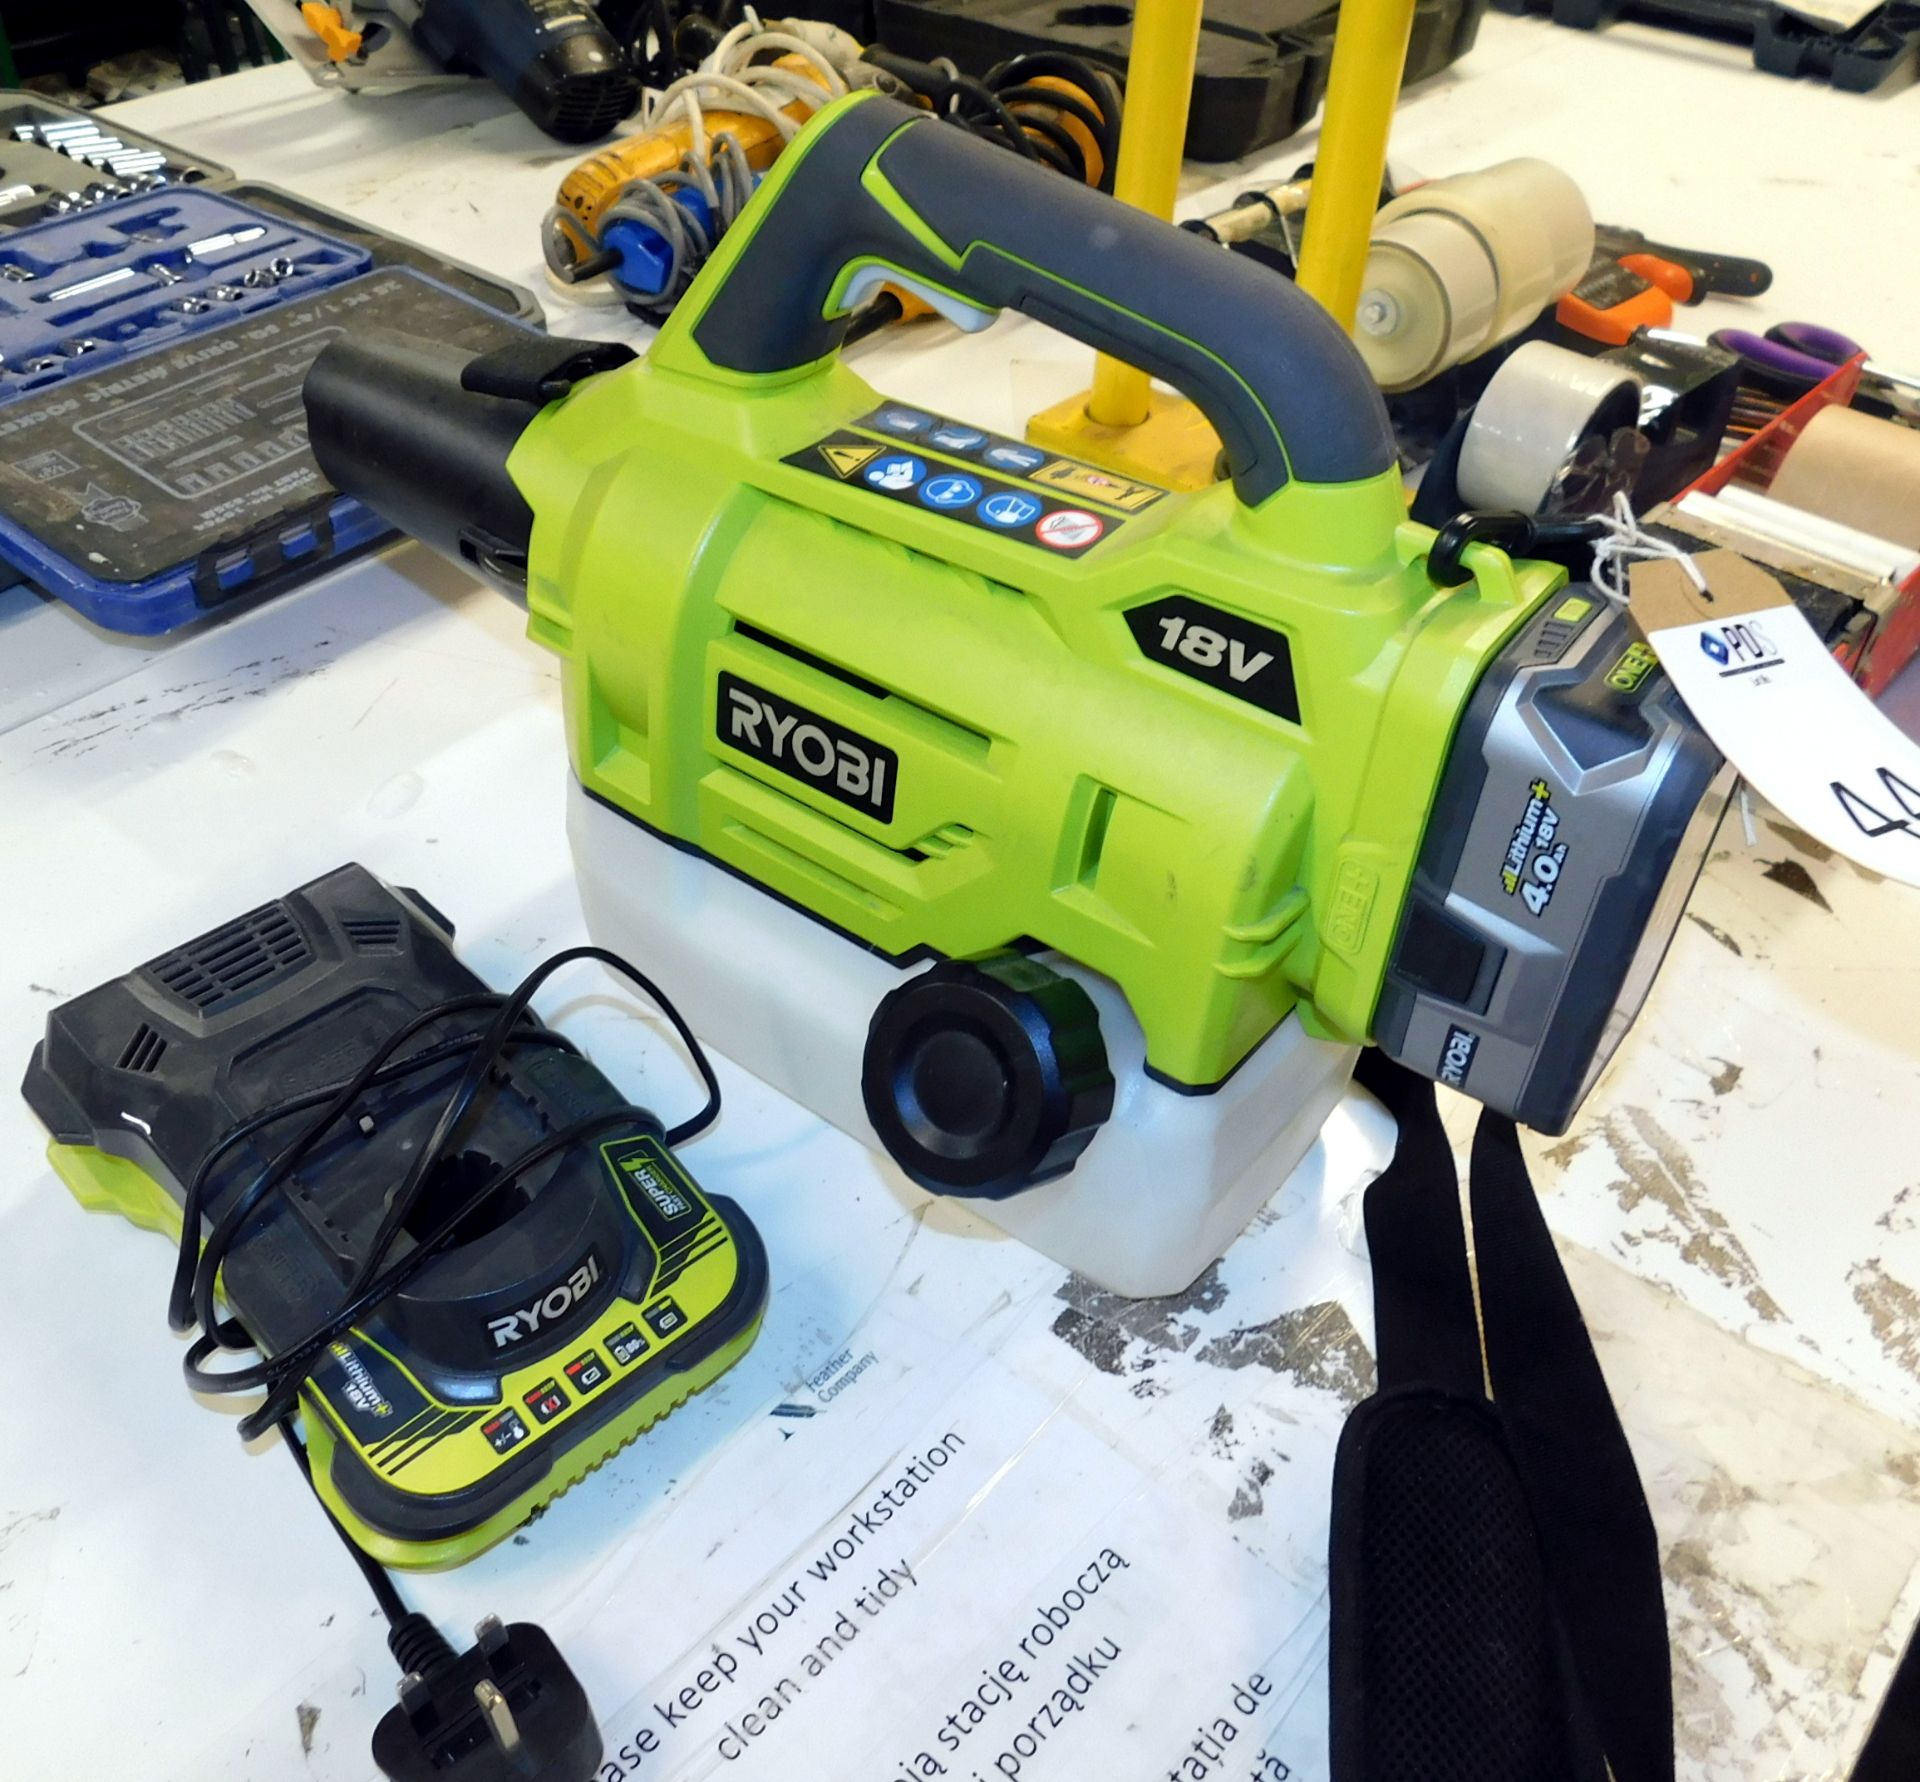 Ryobi RB18L40 (130429367) 18V xx Serial Number, 131614 with Lithium Battery & Charger (Location